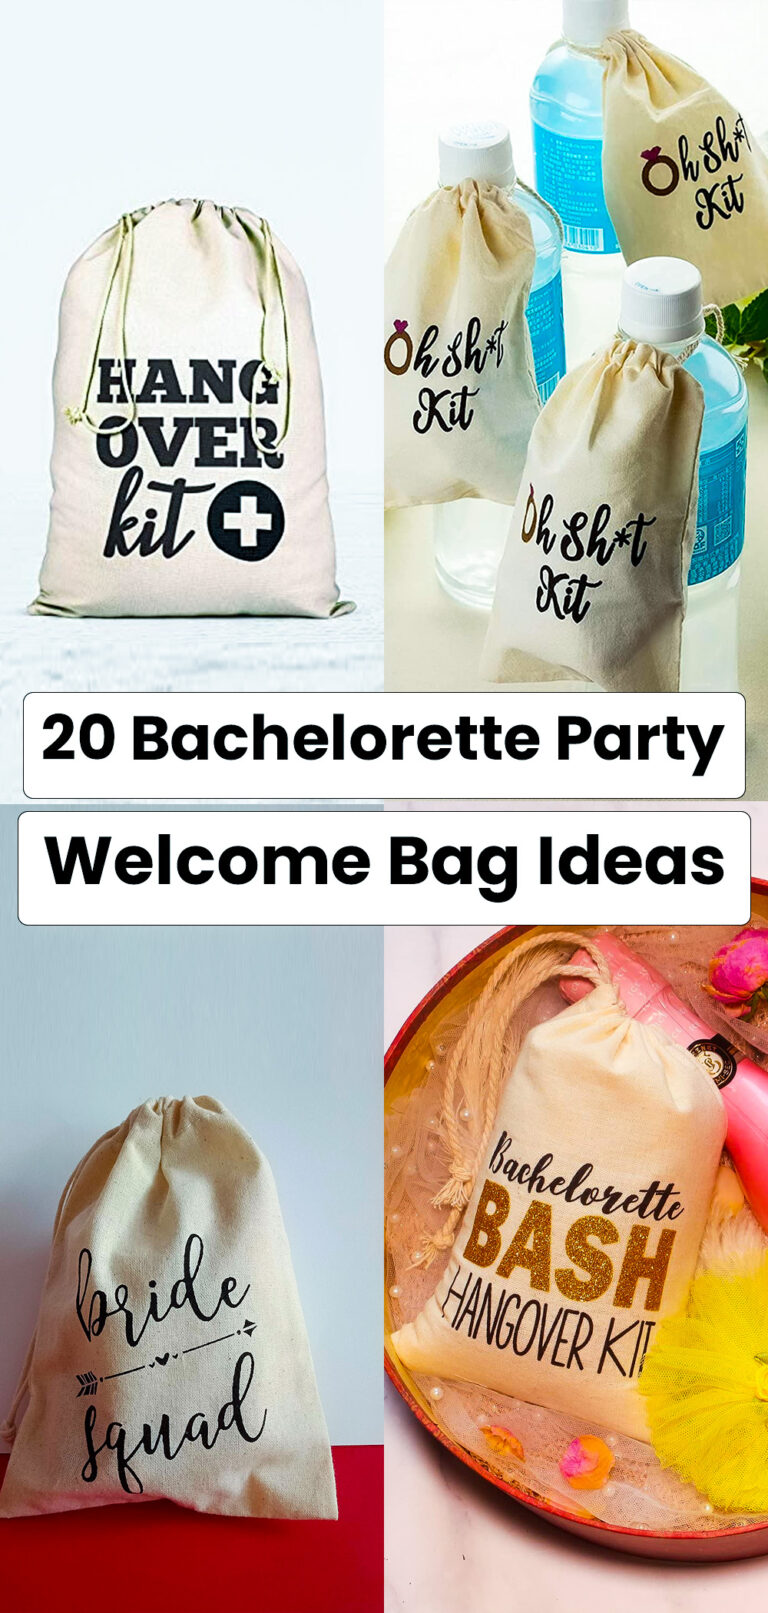 18 Bachelorette Party Welcome Bag Ideas